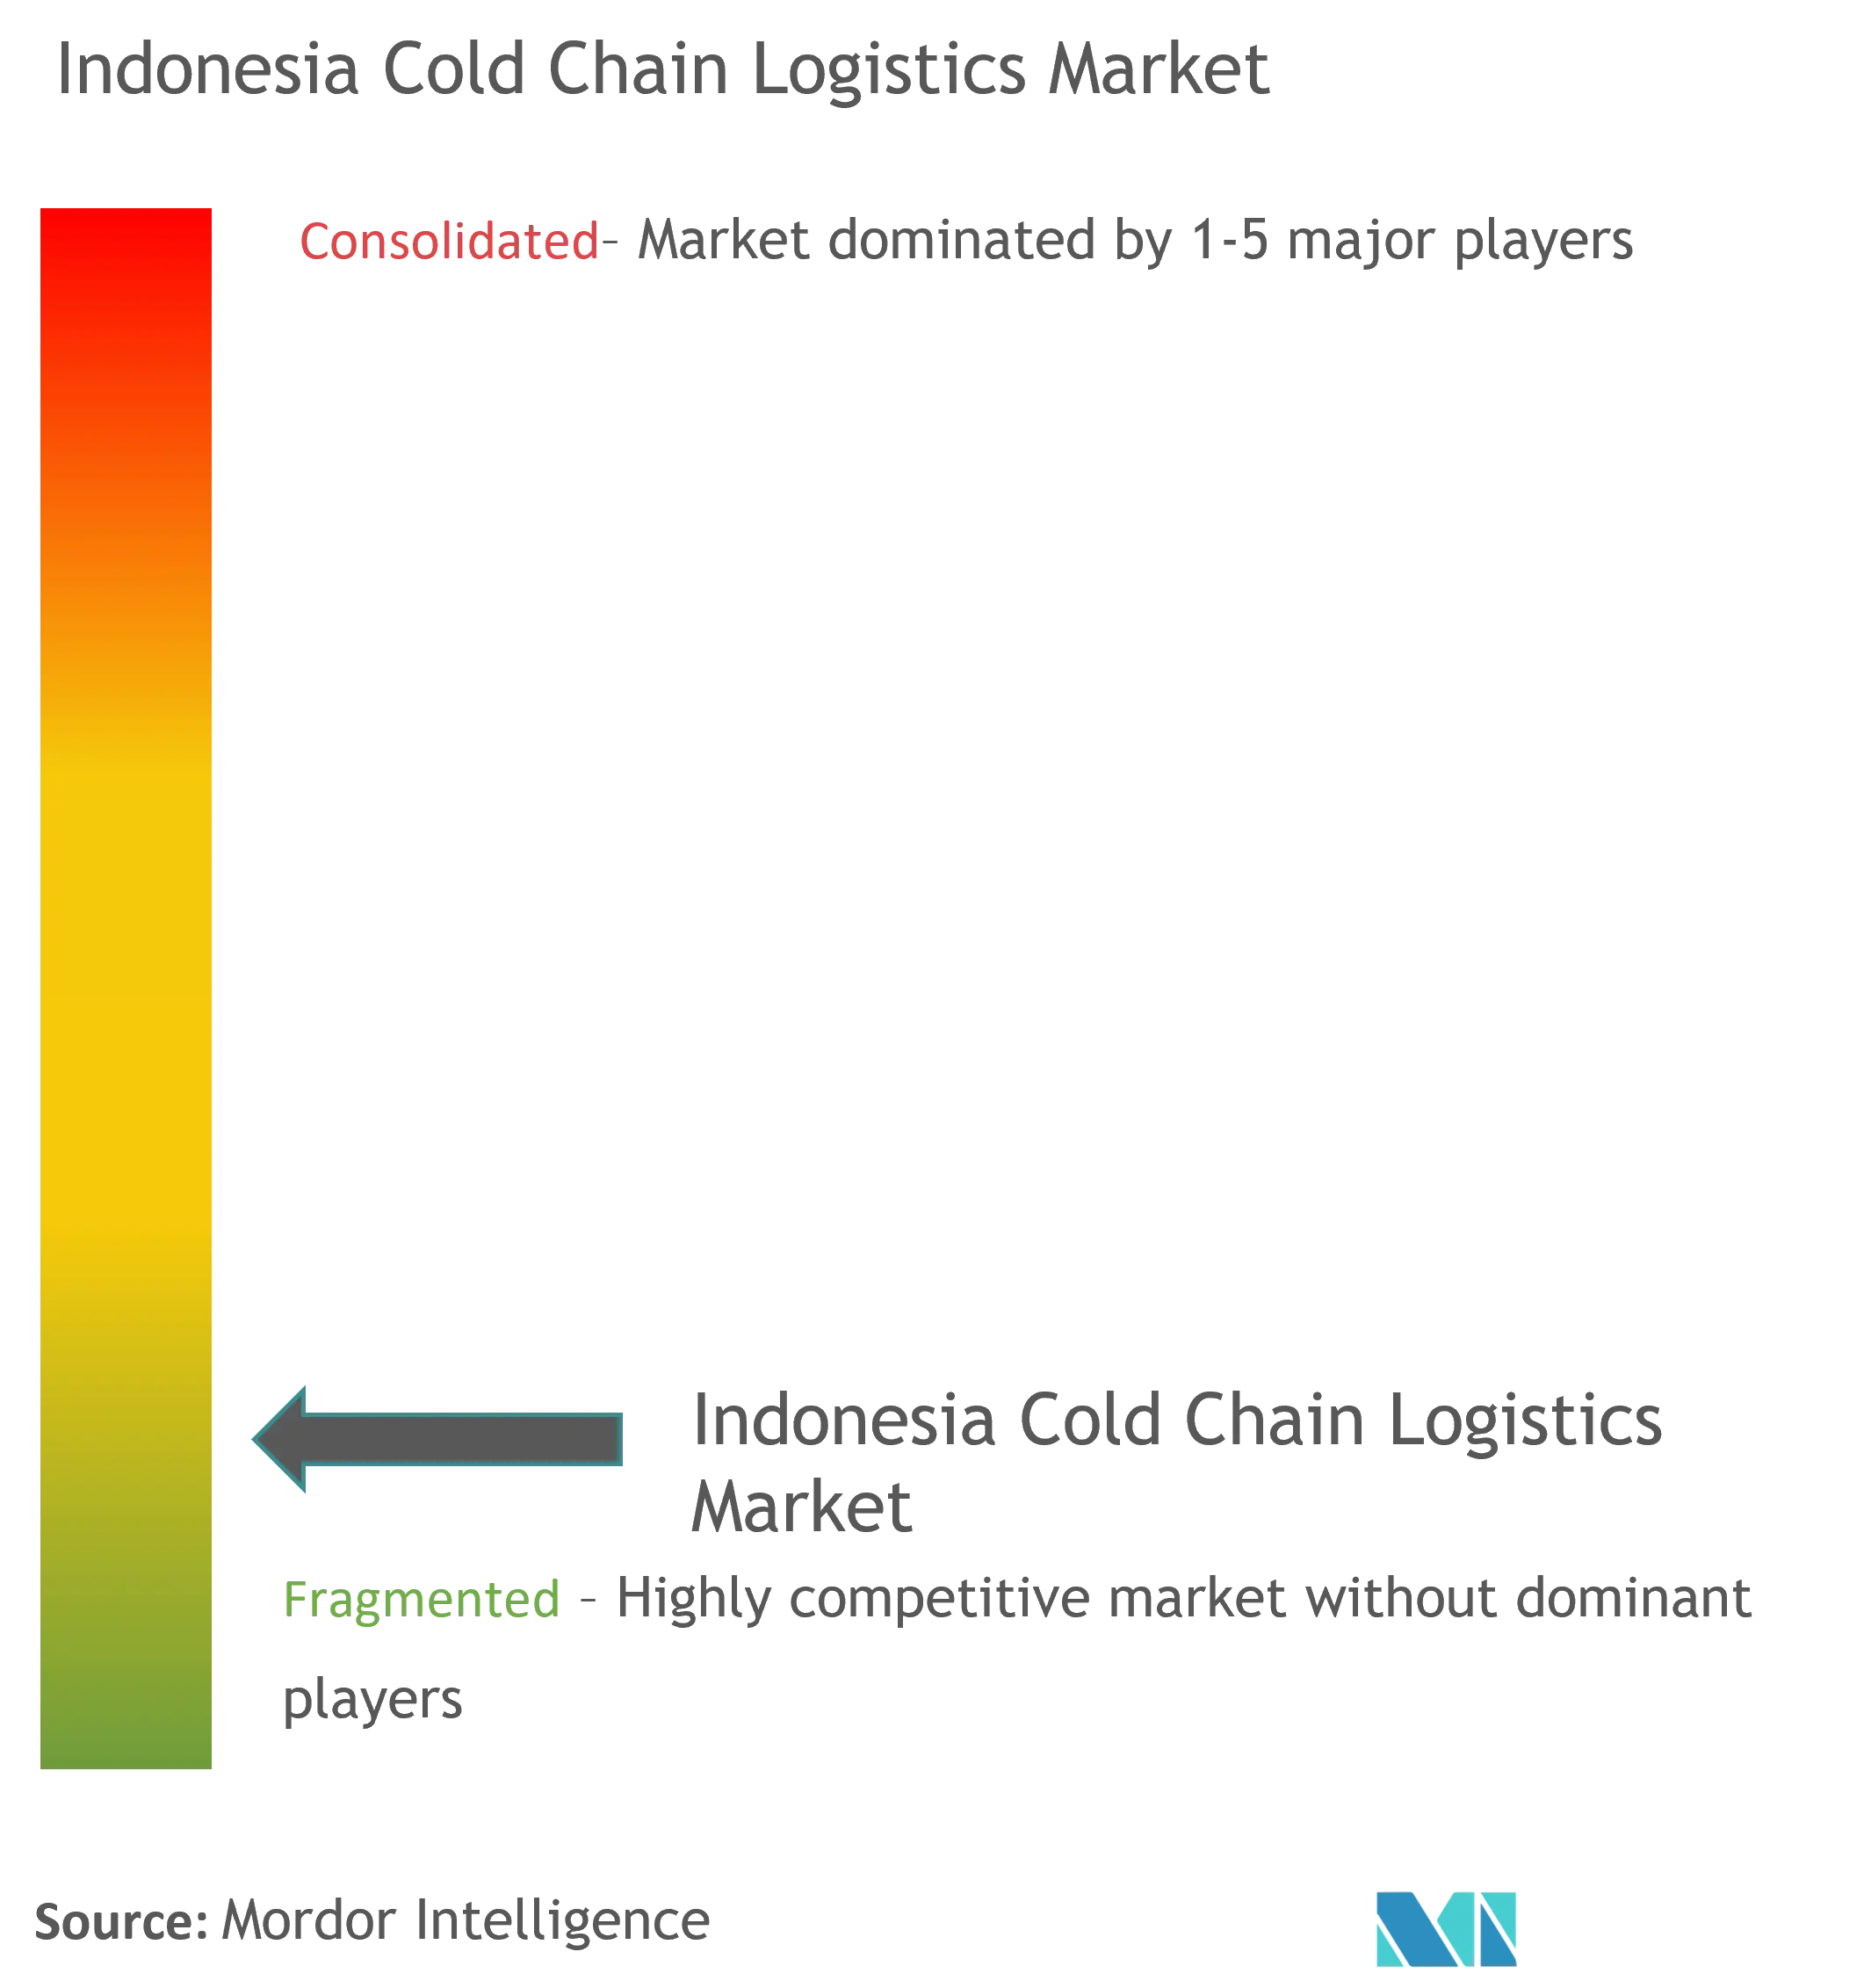 Indonesia Cold Chain Logistics Market  Concentration